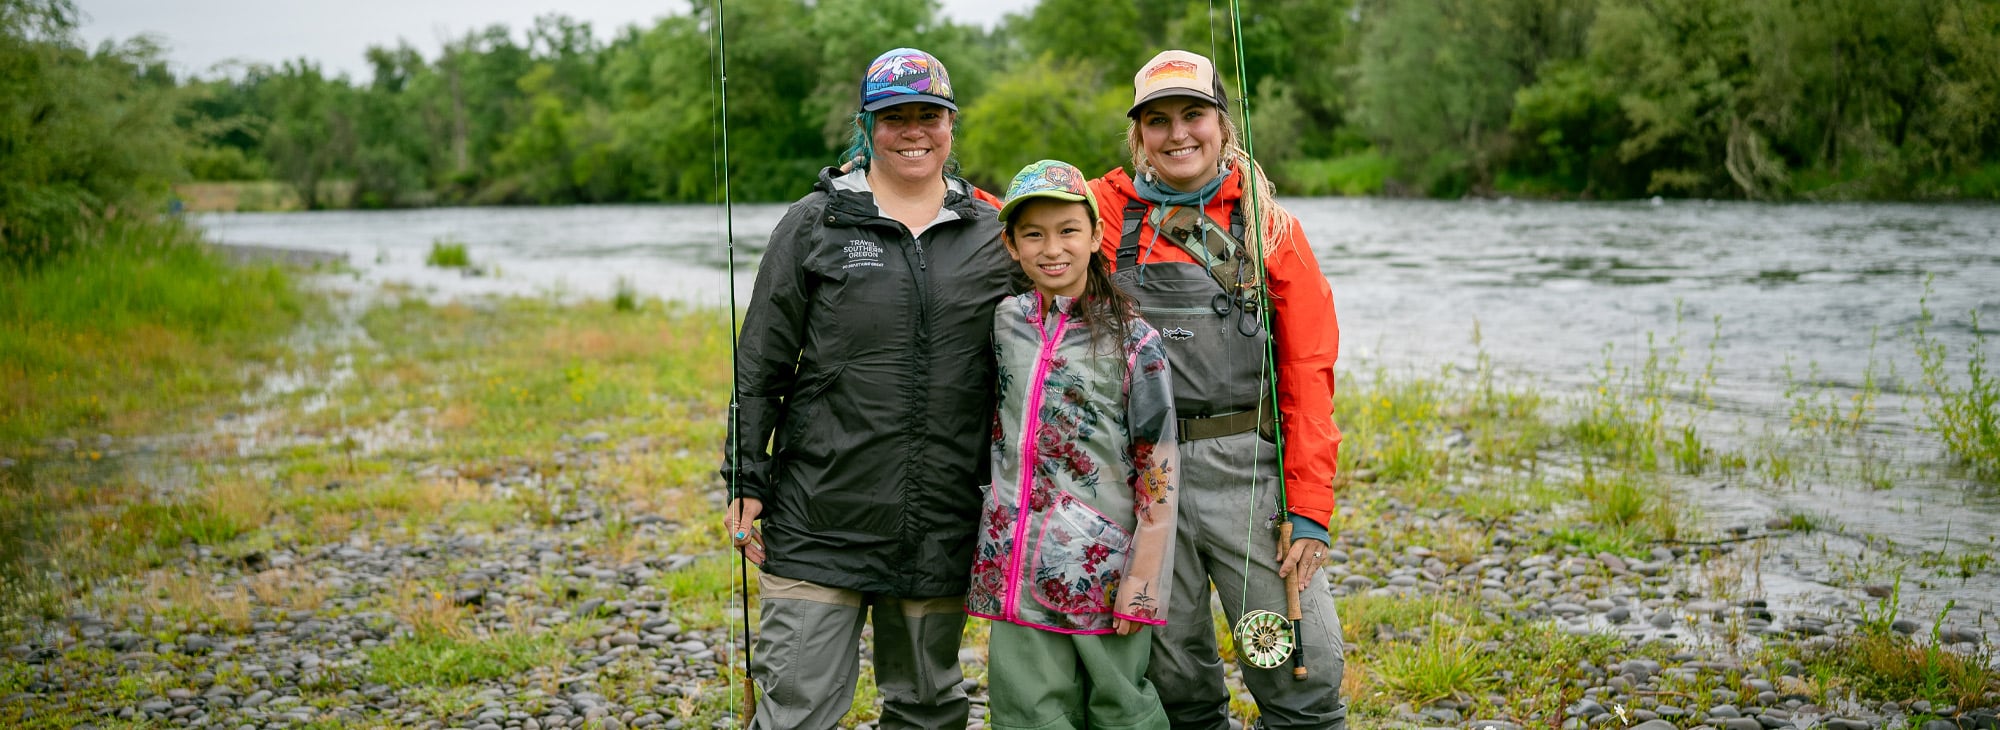 Fly-Fishing With Women, For Women - Travel Oregon